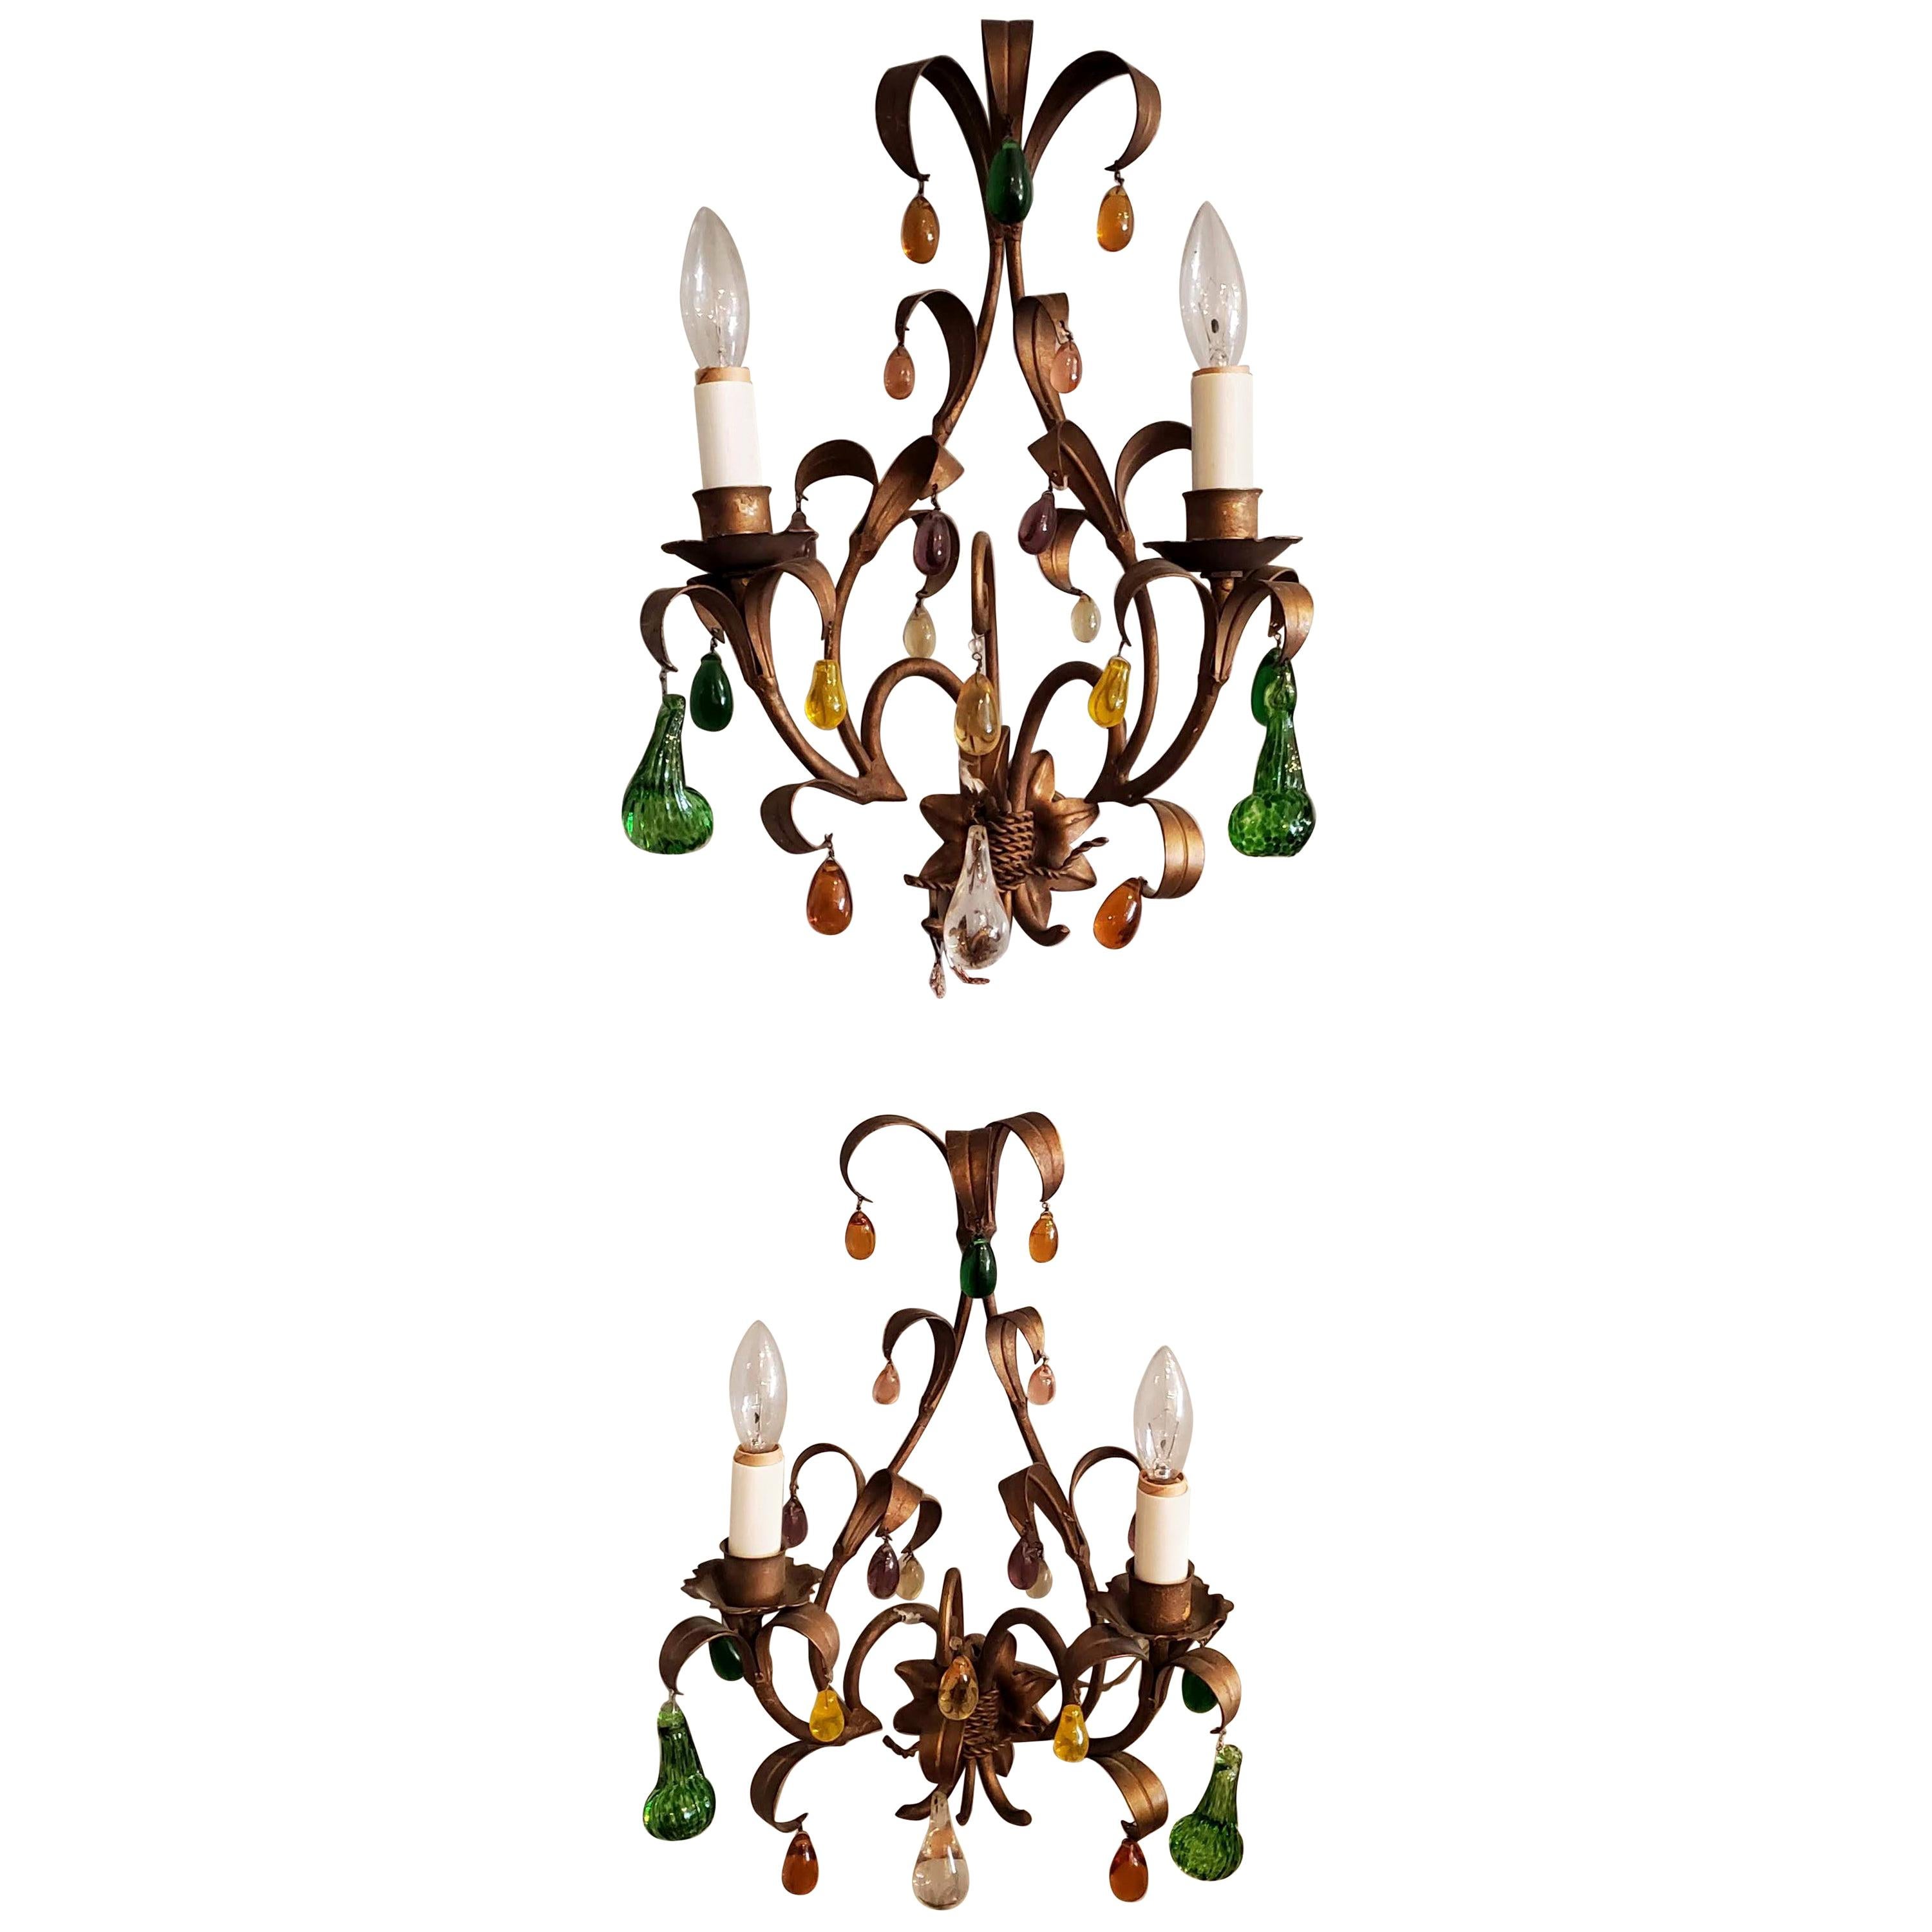 Pair of Early 20th Century French Provincial Metal & Glass Pendant Wall Sconces